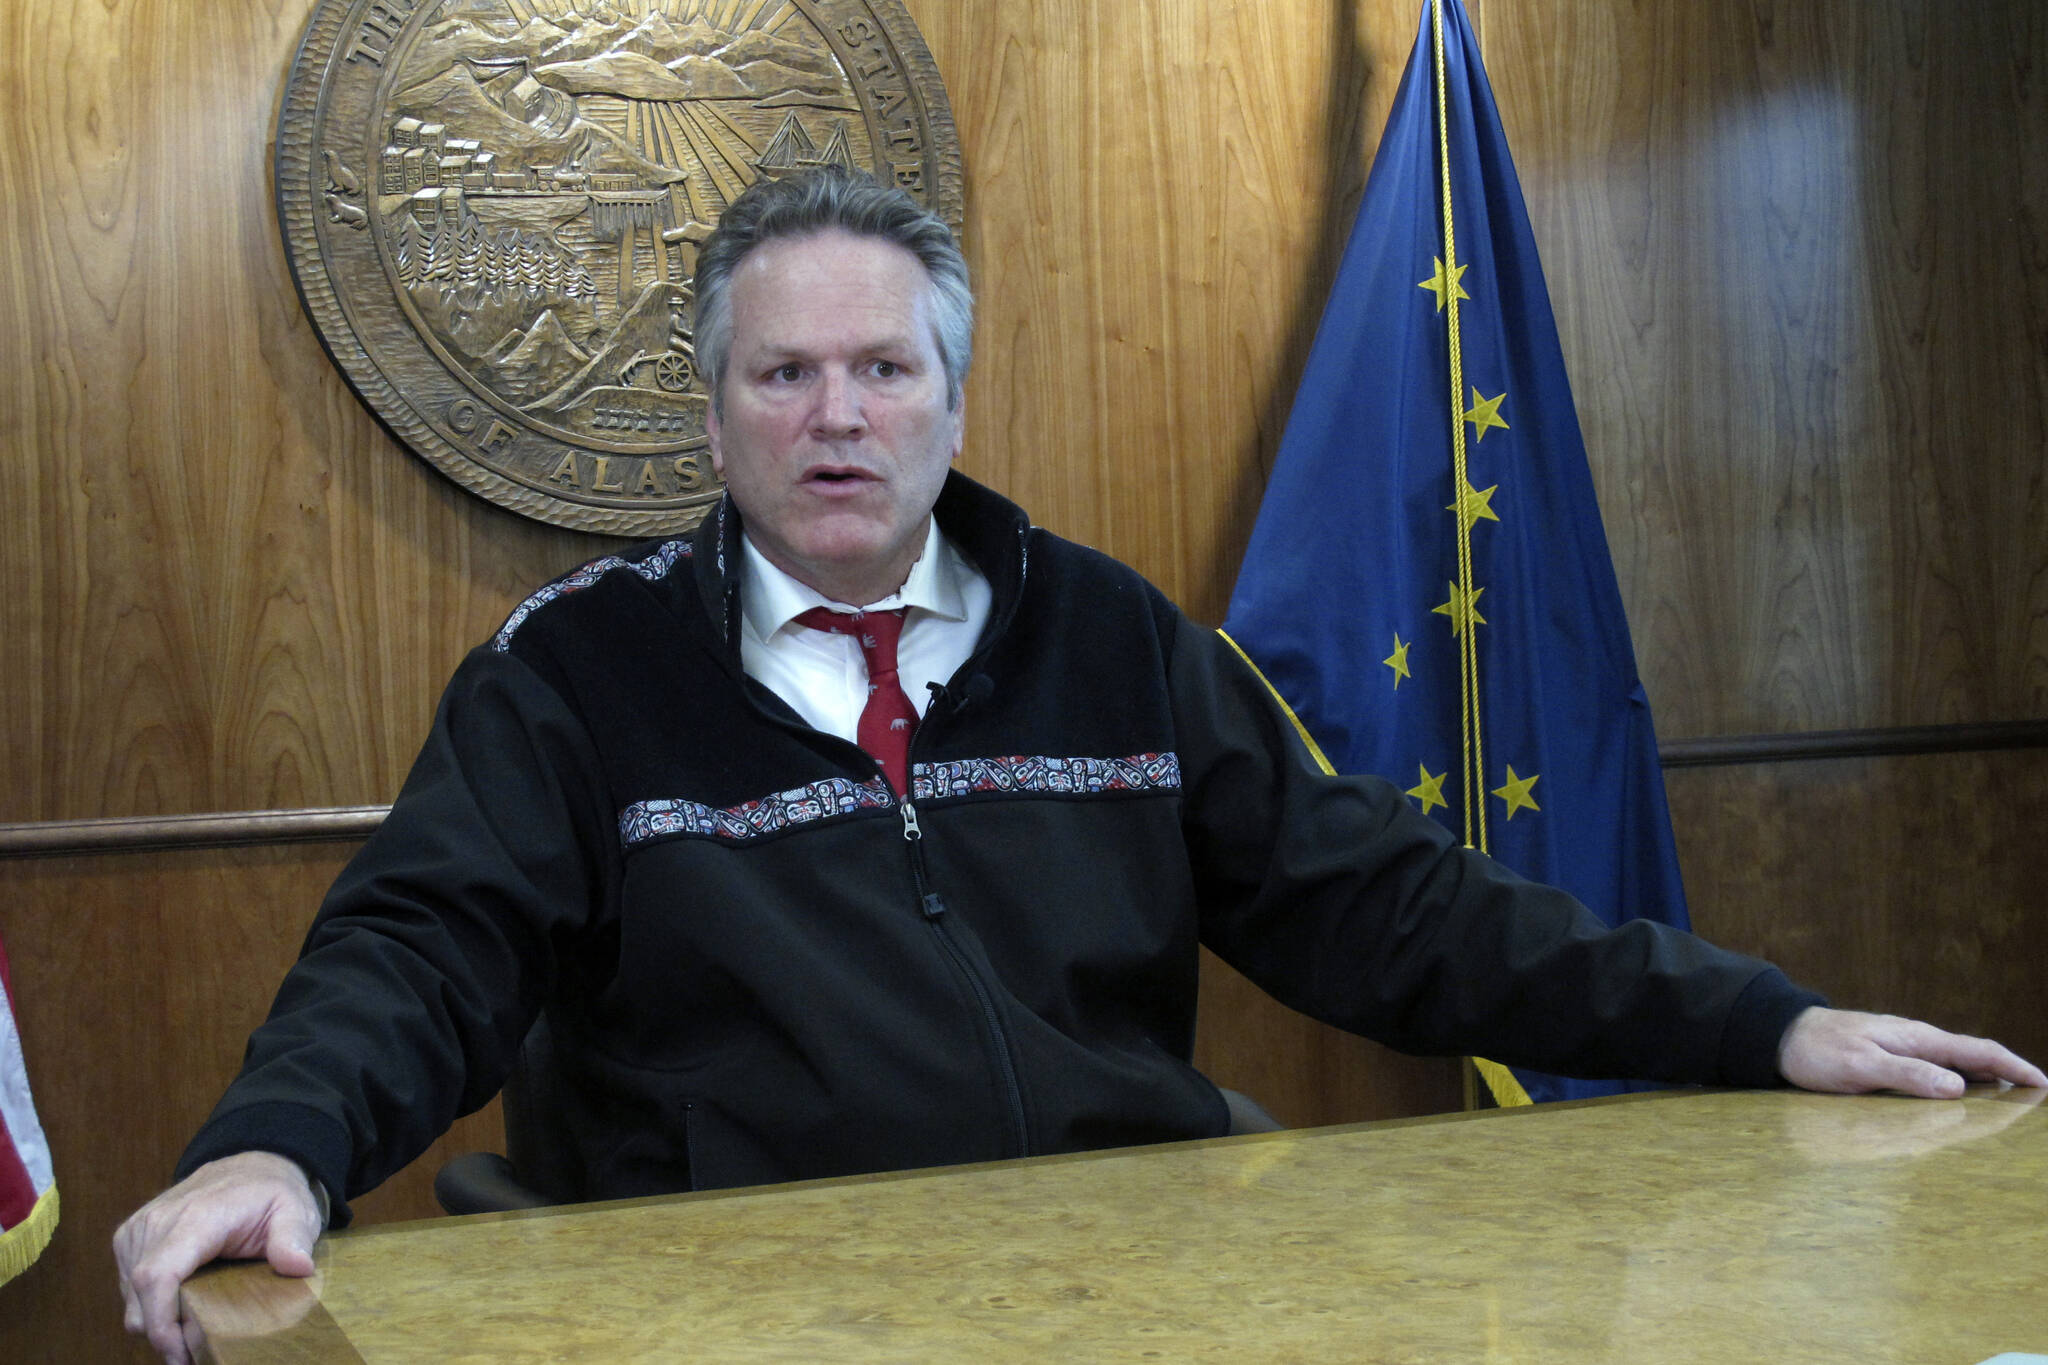 Gov. Mike Dunleavy speaks with reporters during a news briefing on Tuesday, Sept. 14, 2021, in Juneau, Alaska. Dunleavy said he doesn’t see his acceptance of former President Donald Trump’s endorsement as hurting his relationship with the state’s senior U.S. senator, Republican Lisa Murkowski, who voted to convict Trump at his impeachment trial last year and whom Trump has vowed to fight in her reelection bid. (AP Photo / Becky Bohrer)